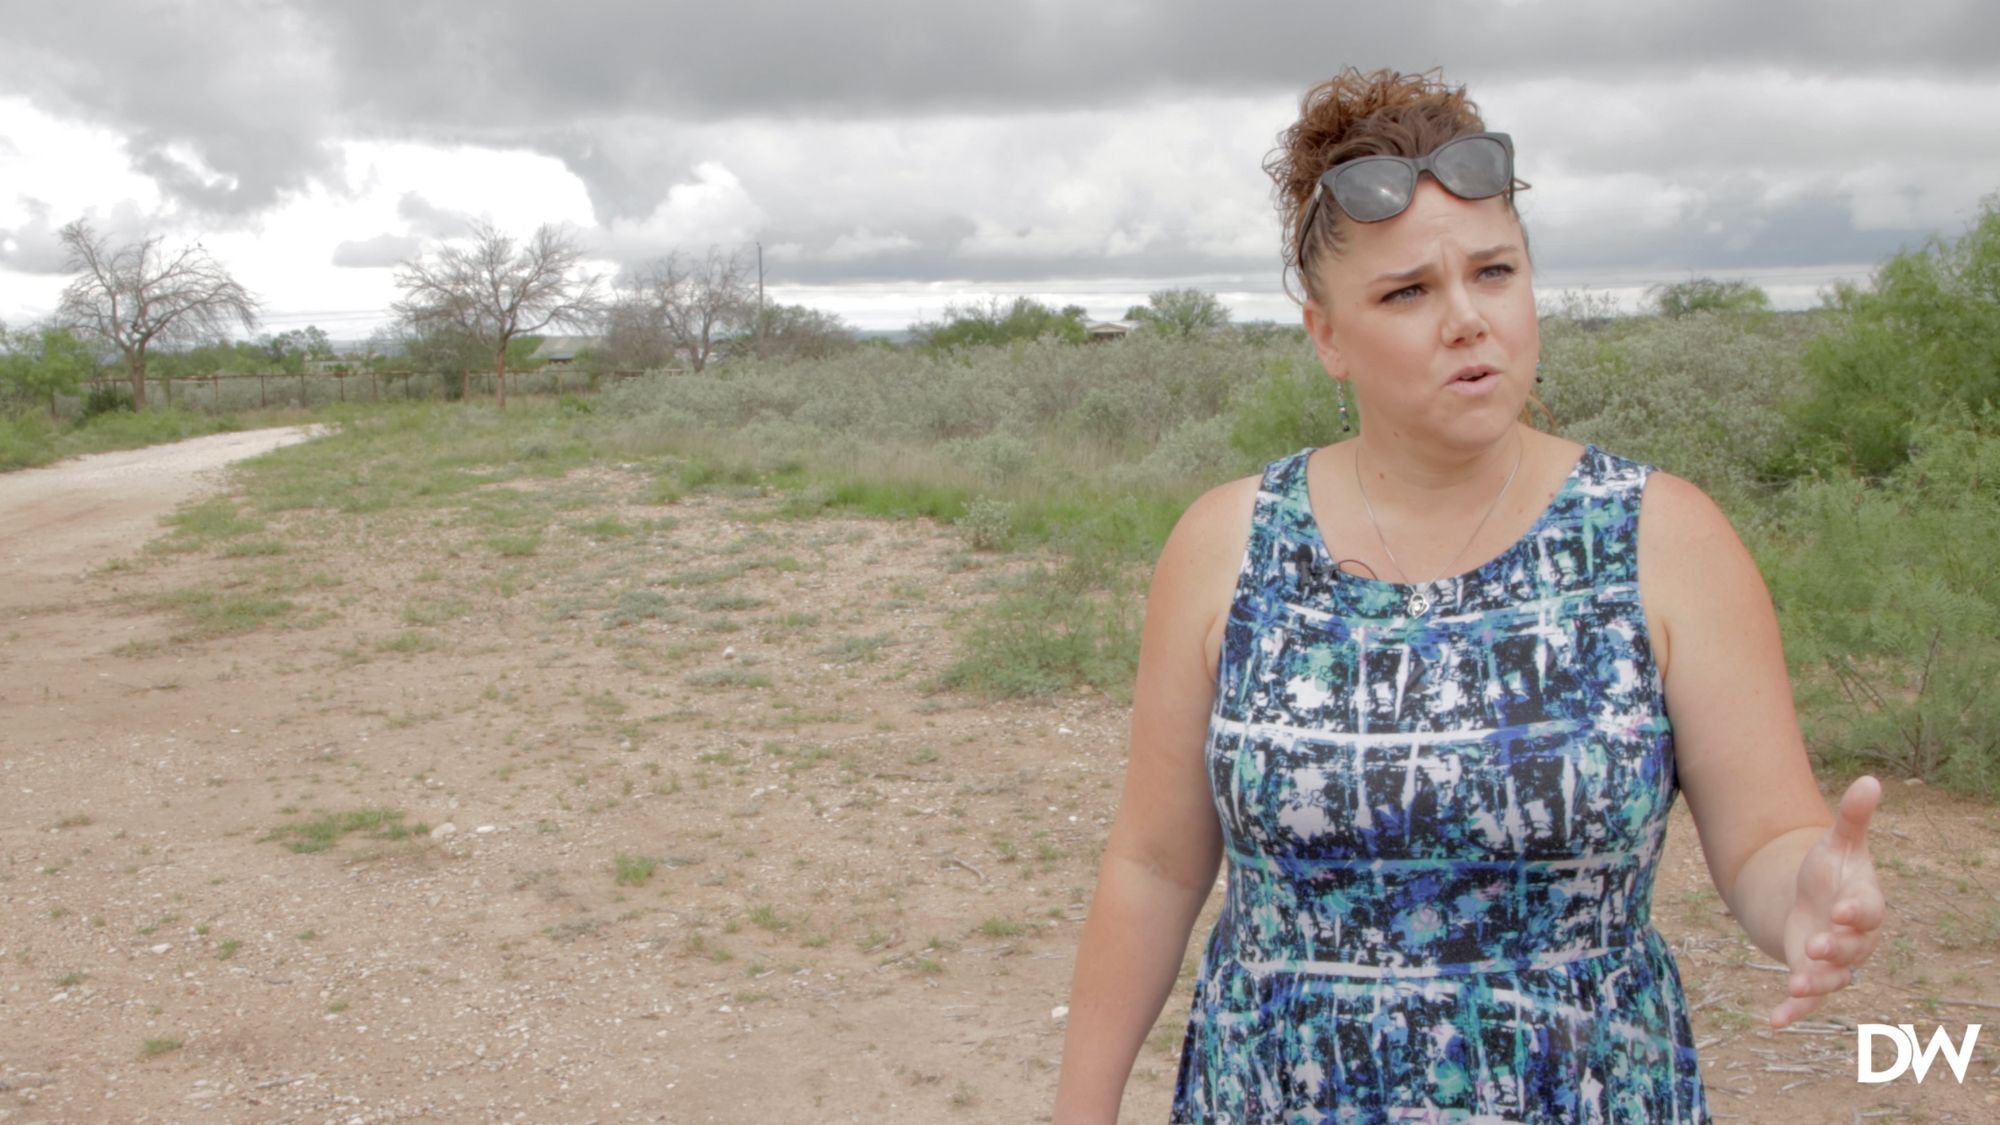 Border Patrol Wife Shares Southern Border’s Dangers and Chaos: ‘Bad Guys at My Window’